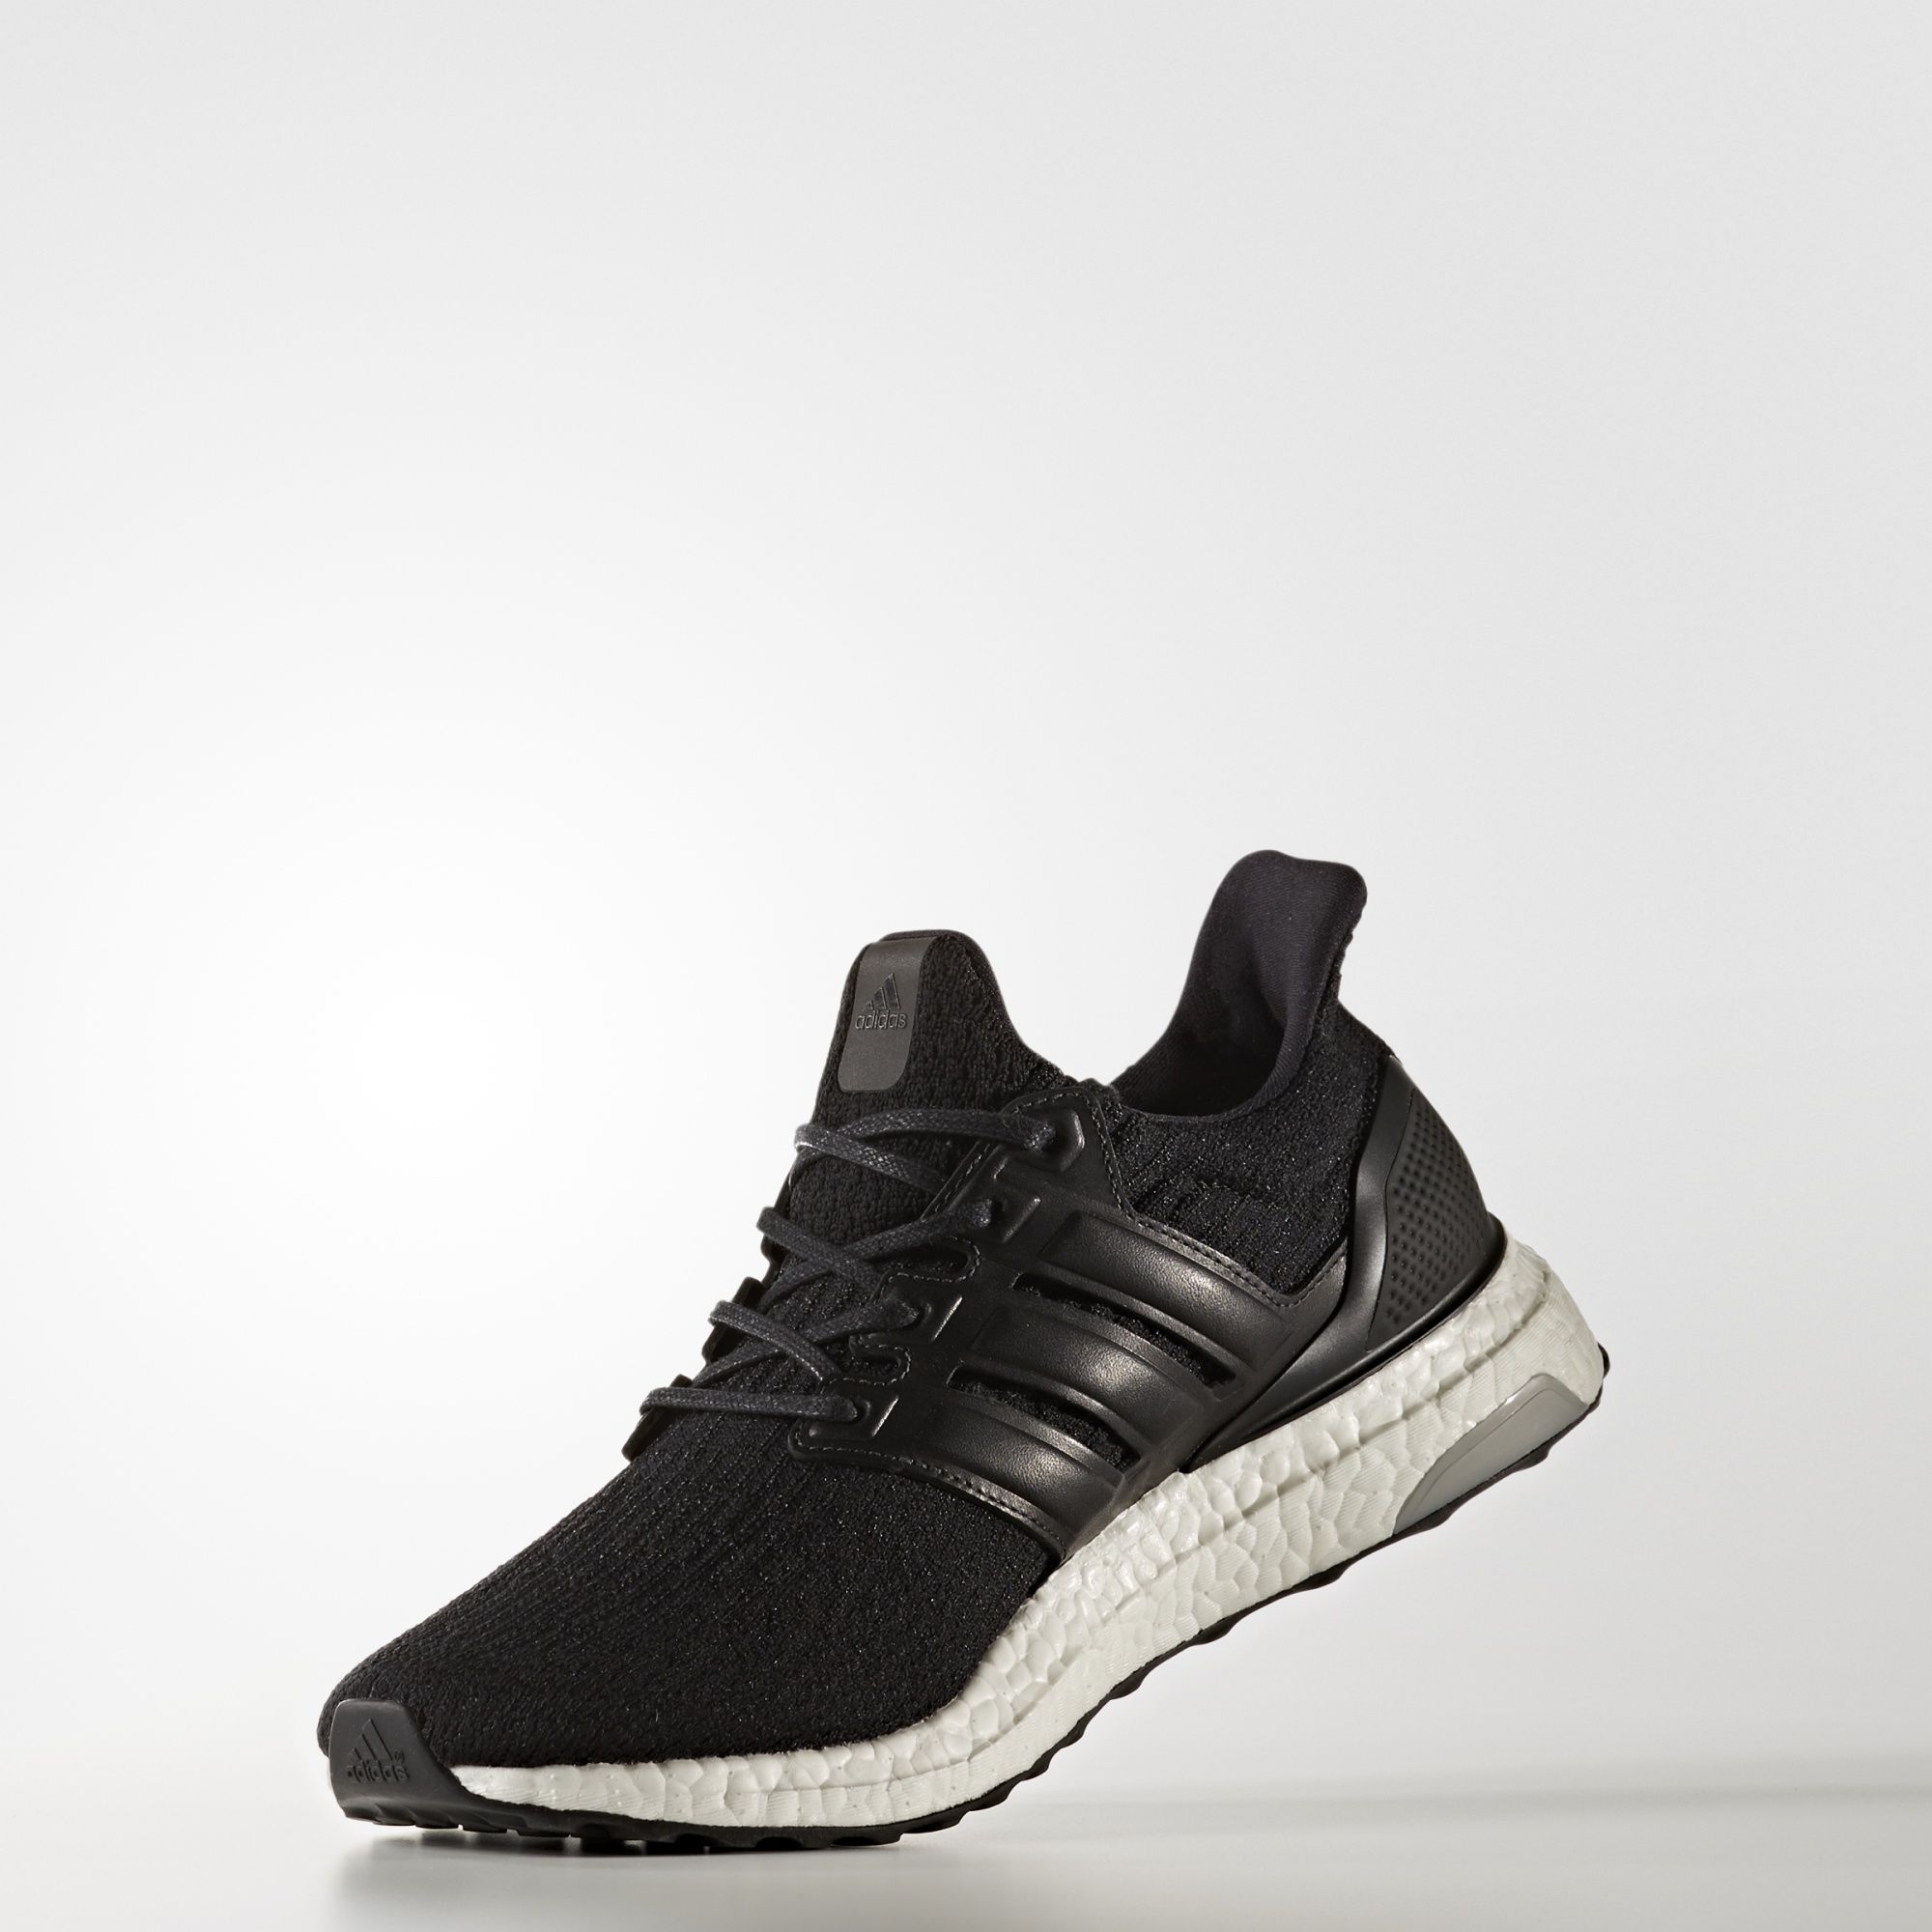 adidas energy boost limited edition